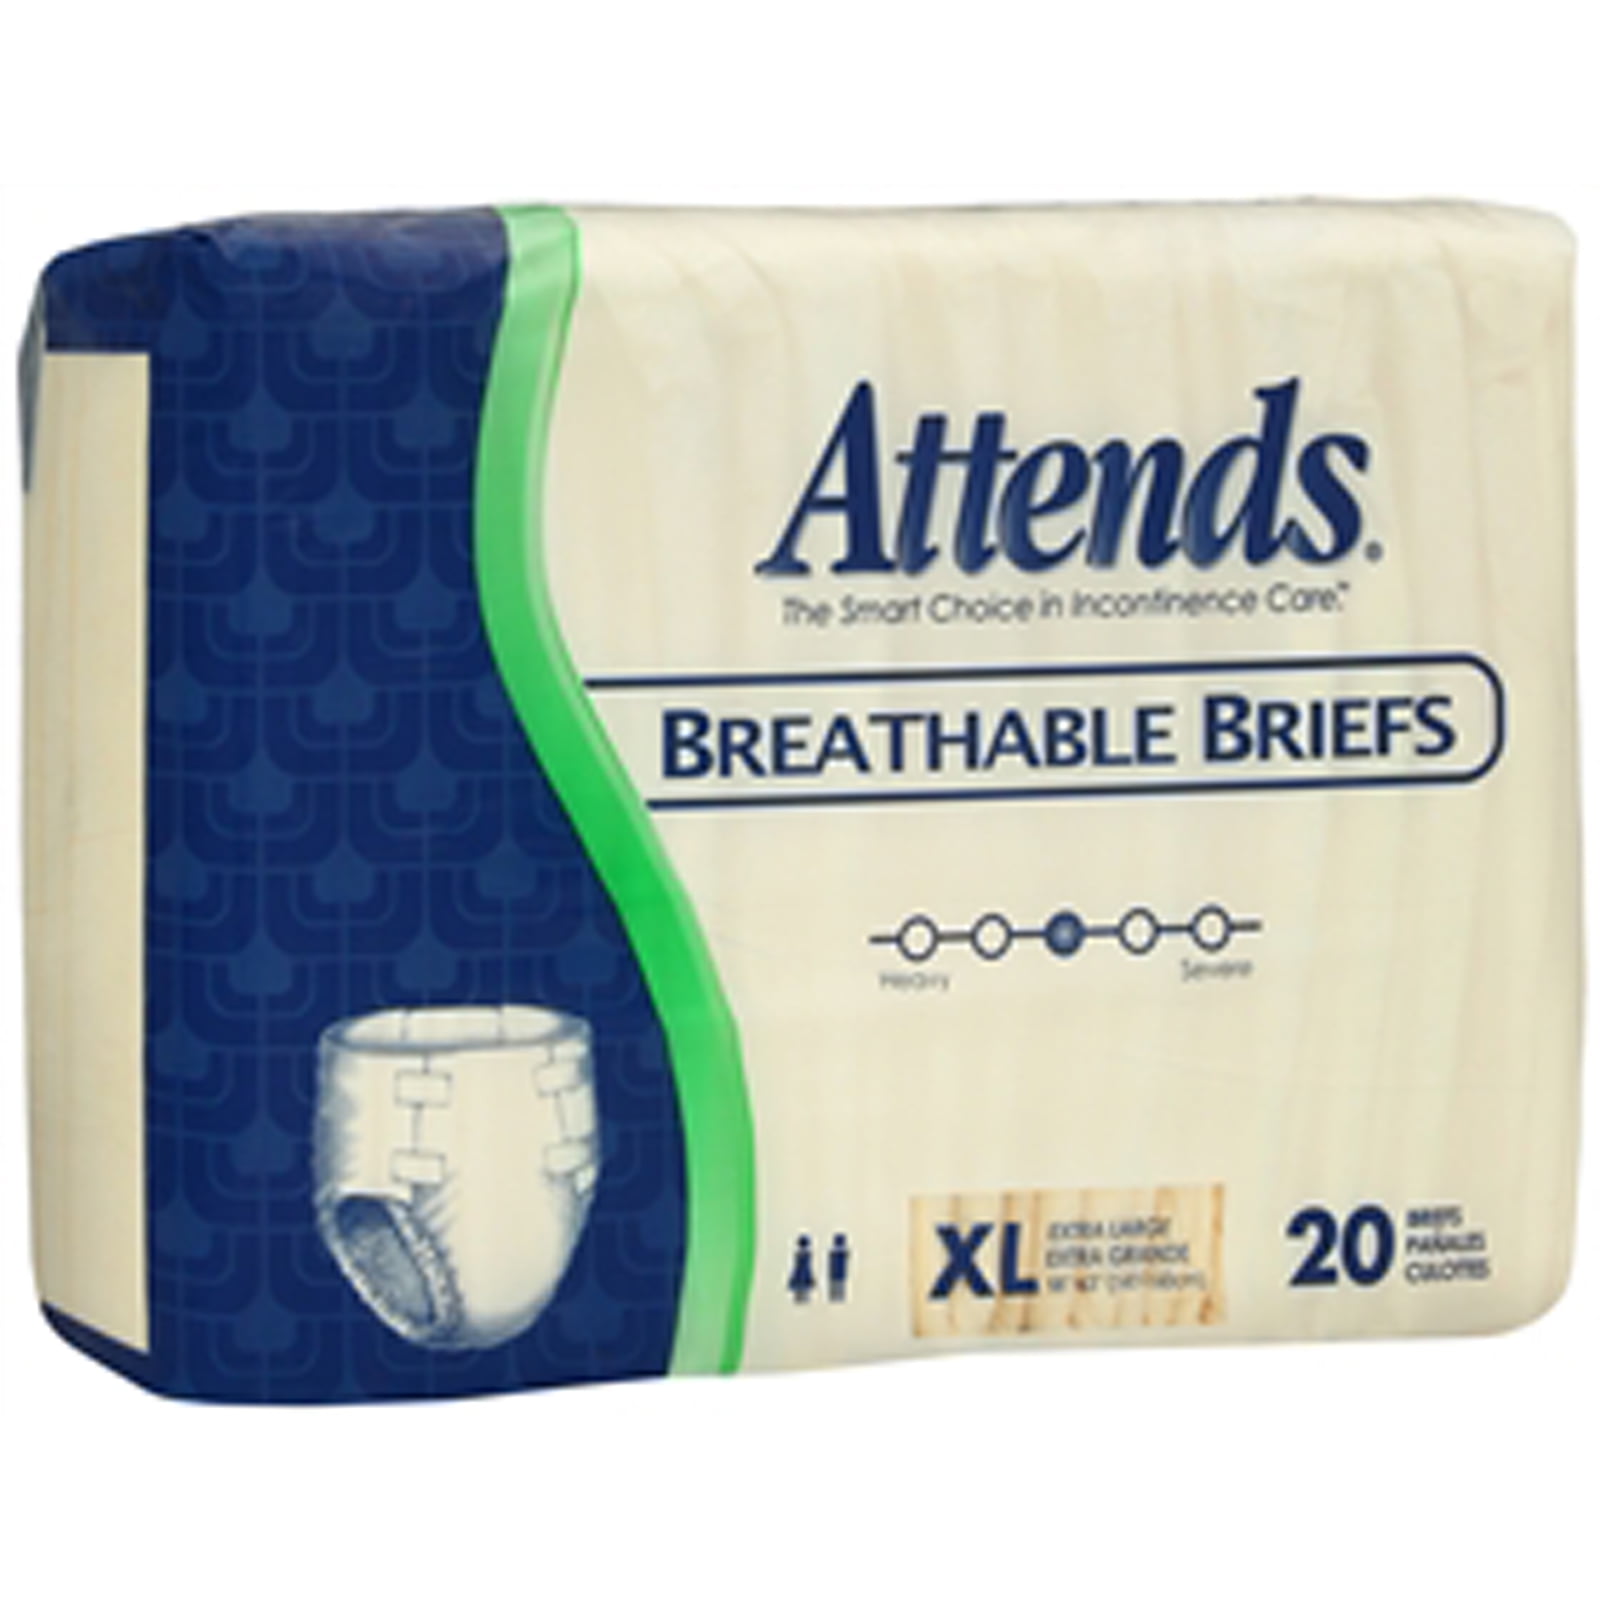 Attends Breathable Briefs, Extra Large, 20 Count, 3 Pack - Walmart.com